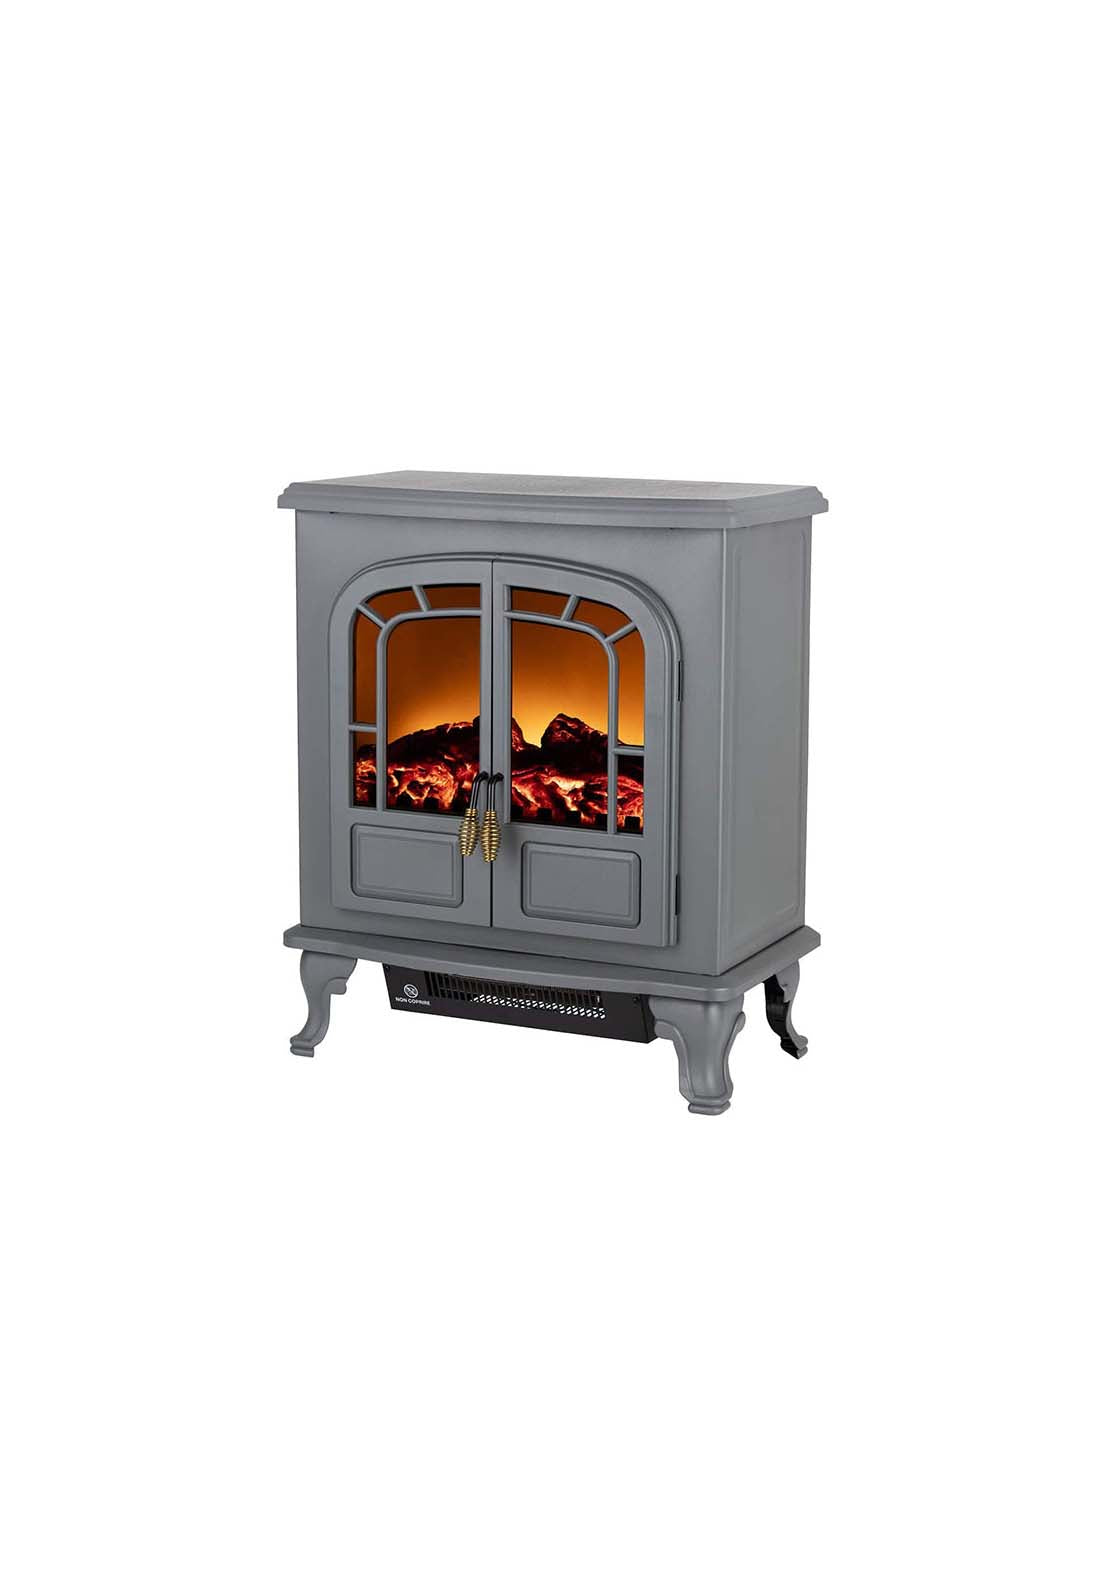 Warmlite Mable 2KW Compact Electric Stove Fire | WL46019G - Grey 1 Shaws Department Stores